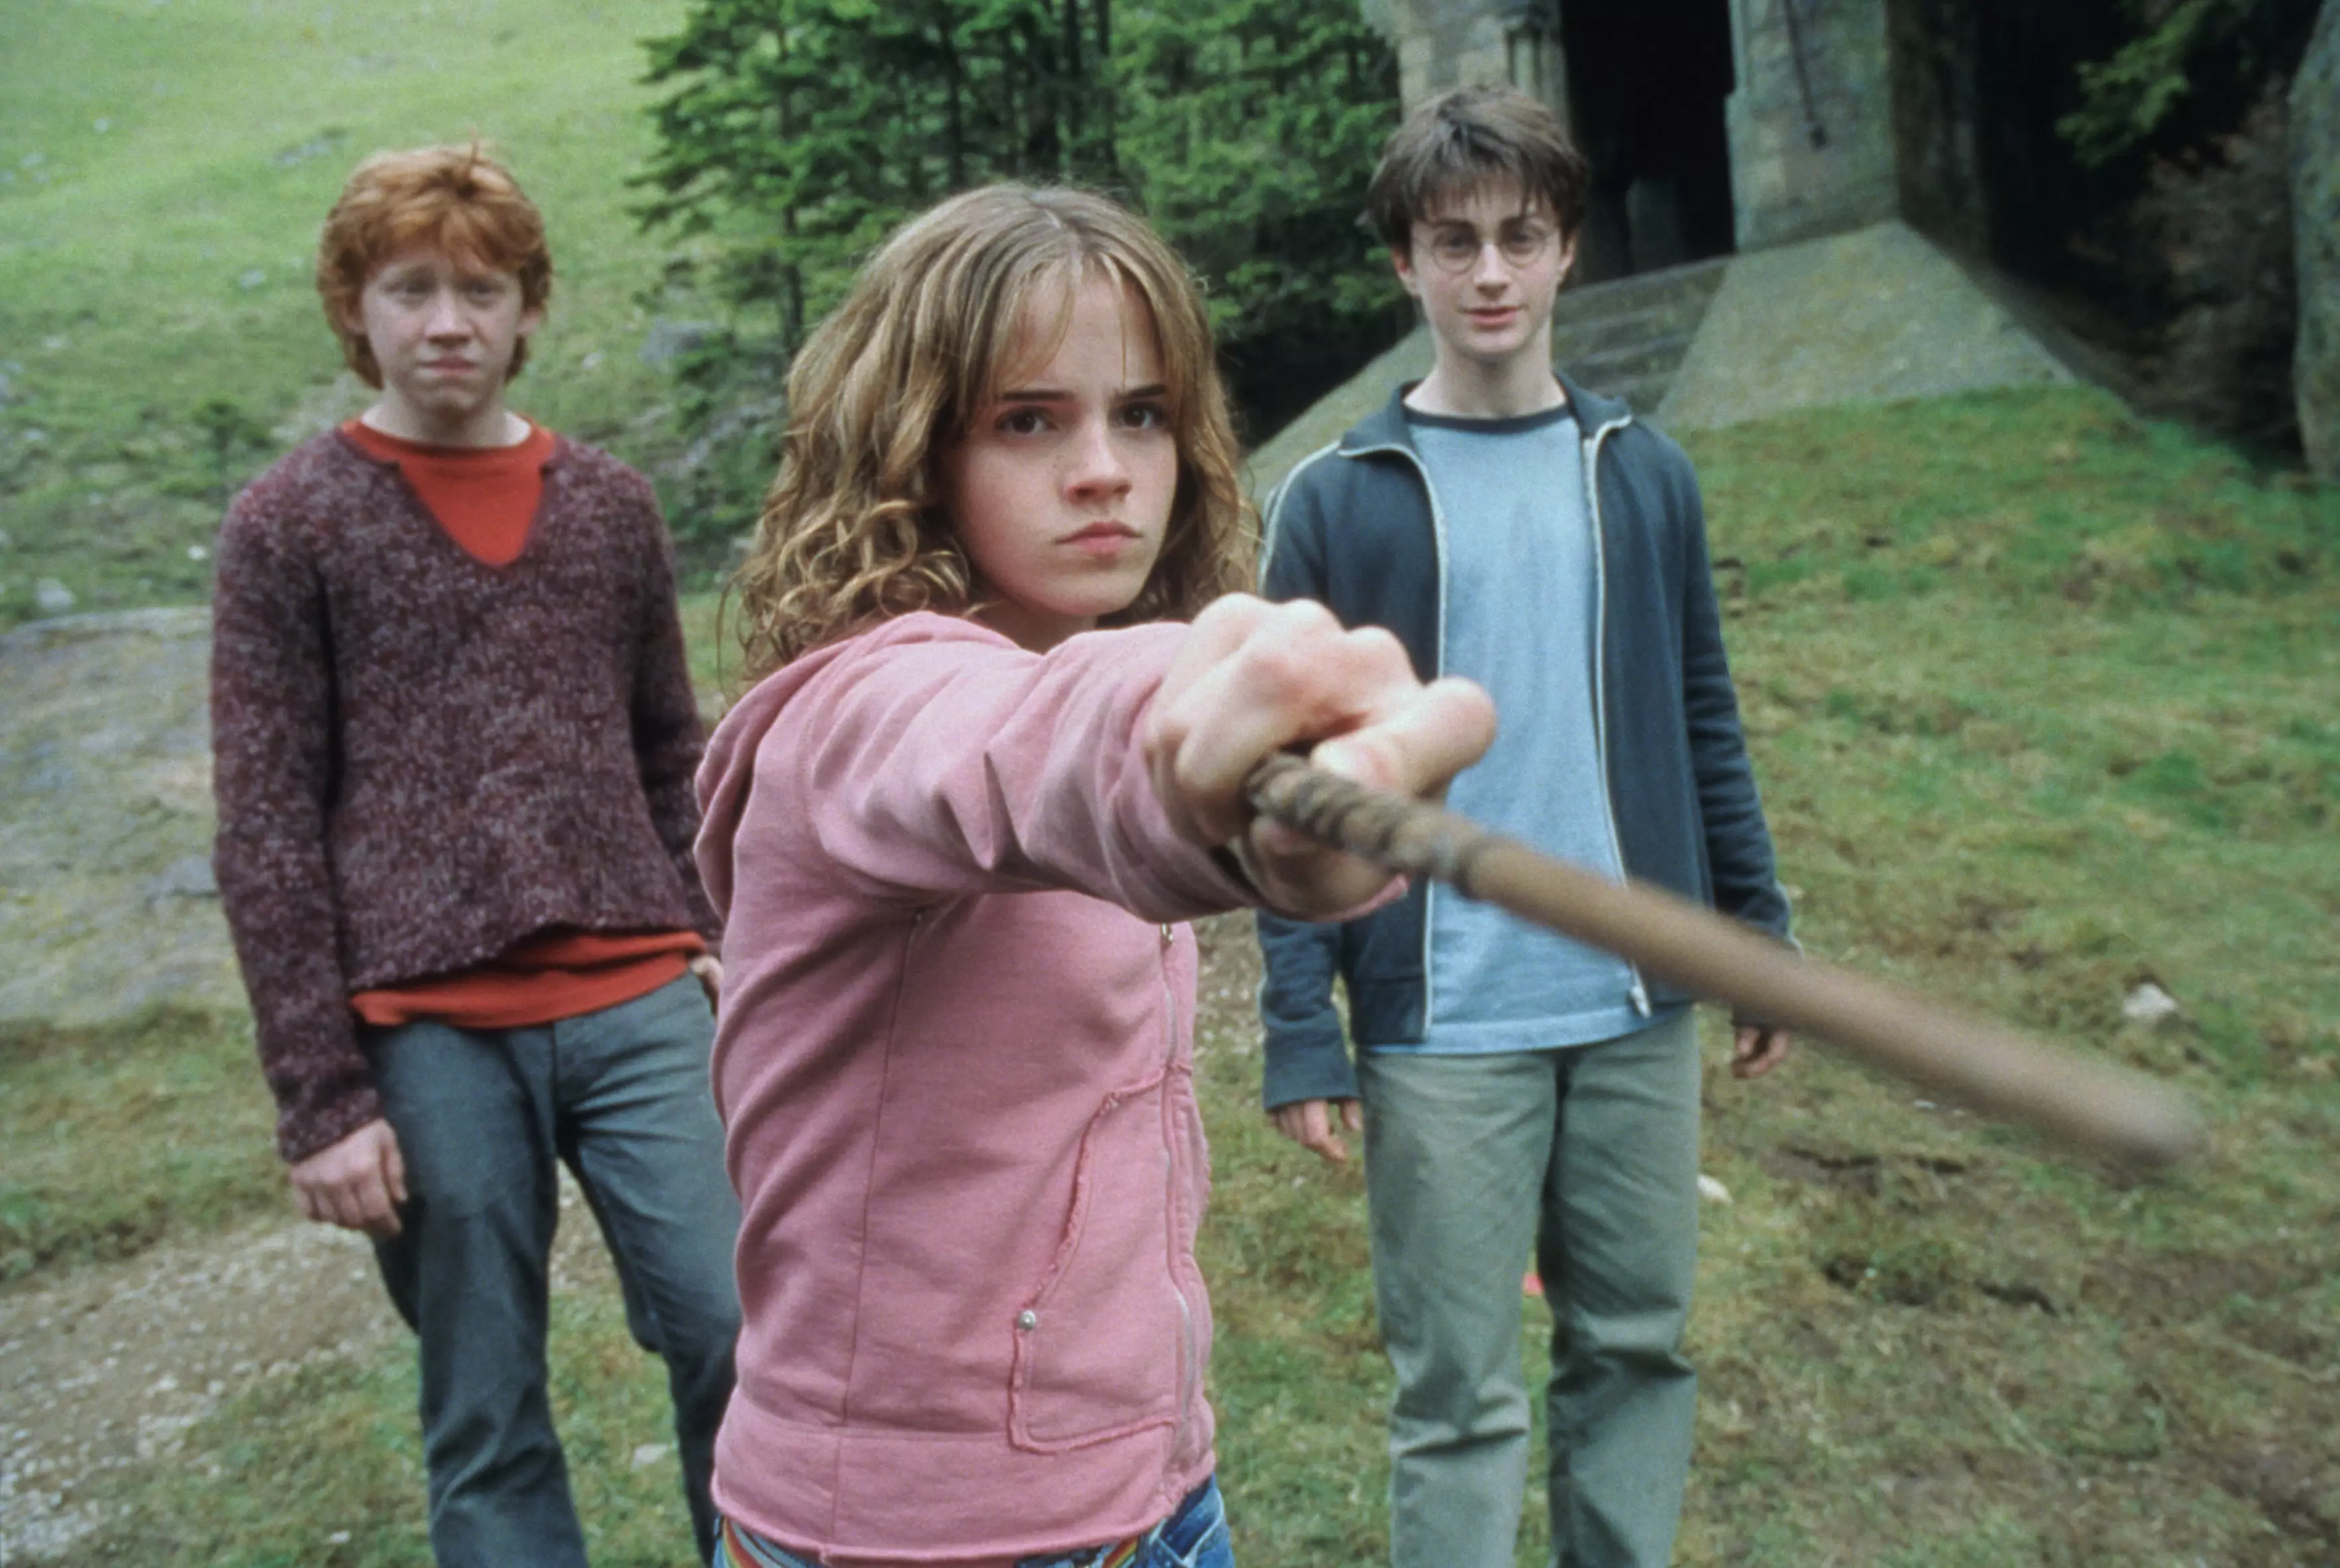 The Prisoner of Azkaban is the top rated film (